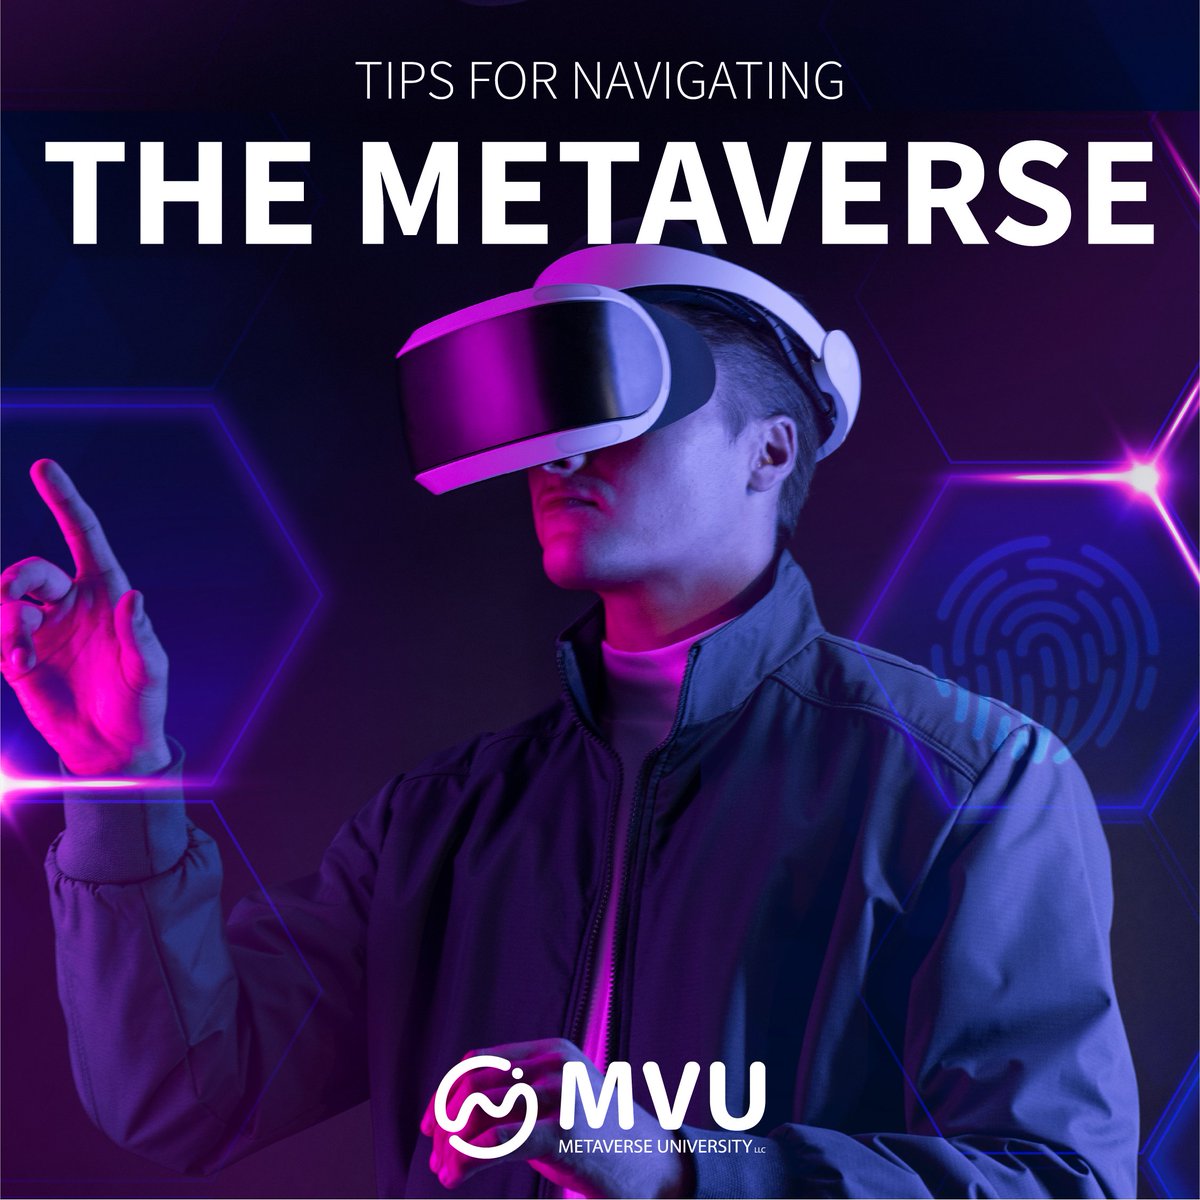 Join us in the Metaverse revolution and be part of shaping the future of human interaction.

At 【mvu.ac】 to learn more about our courses and how we can help you take the next step.

#VirtualReality #AR #DigitalUniverse #FutureOfInteraction #VirtualSpaces